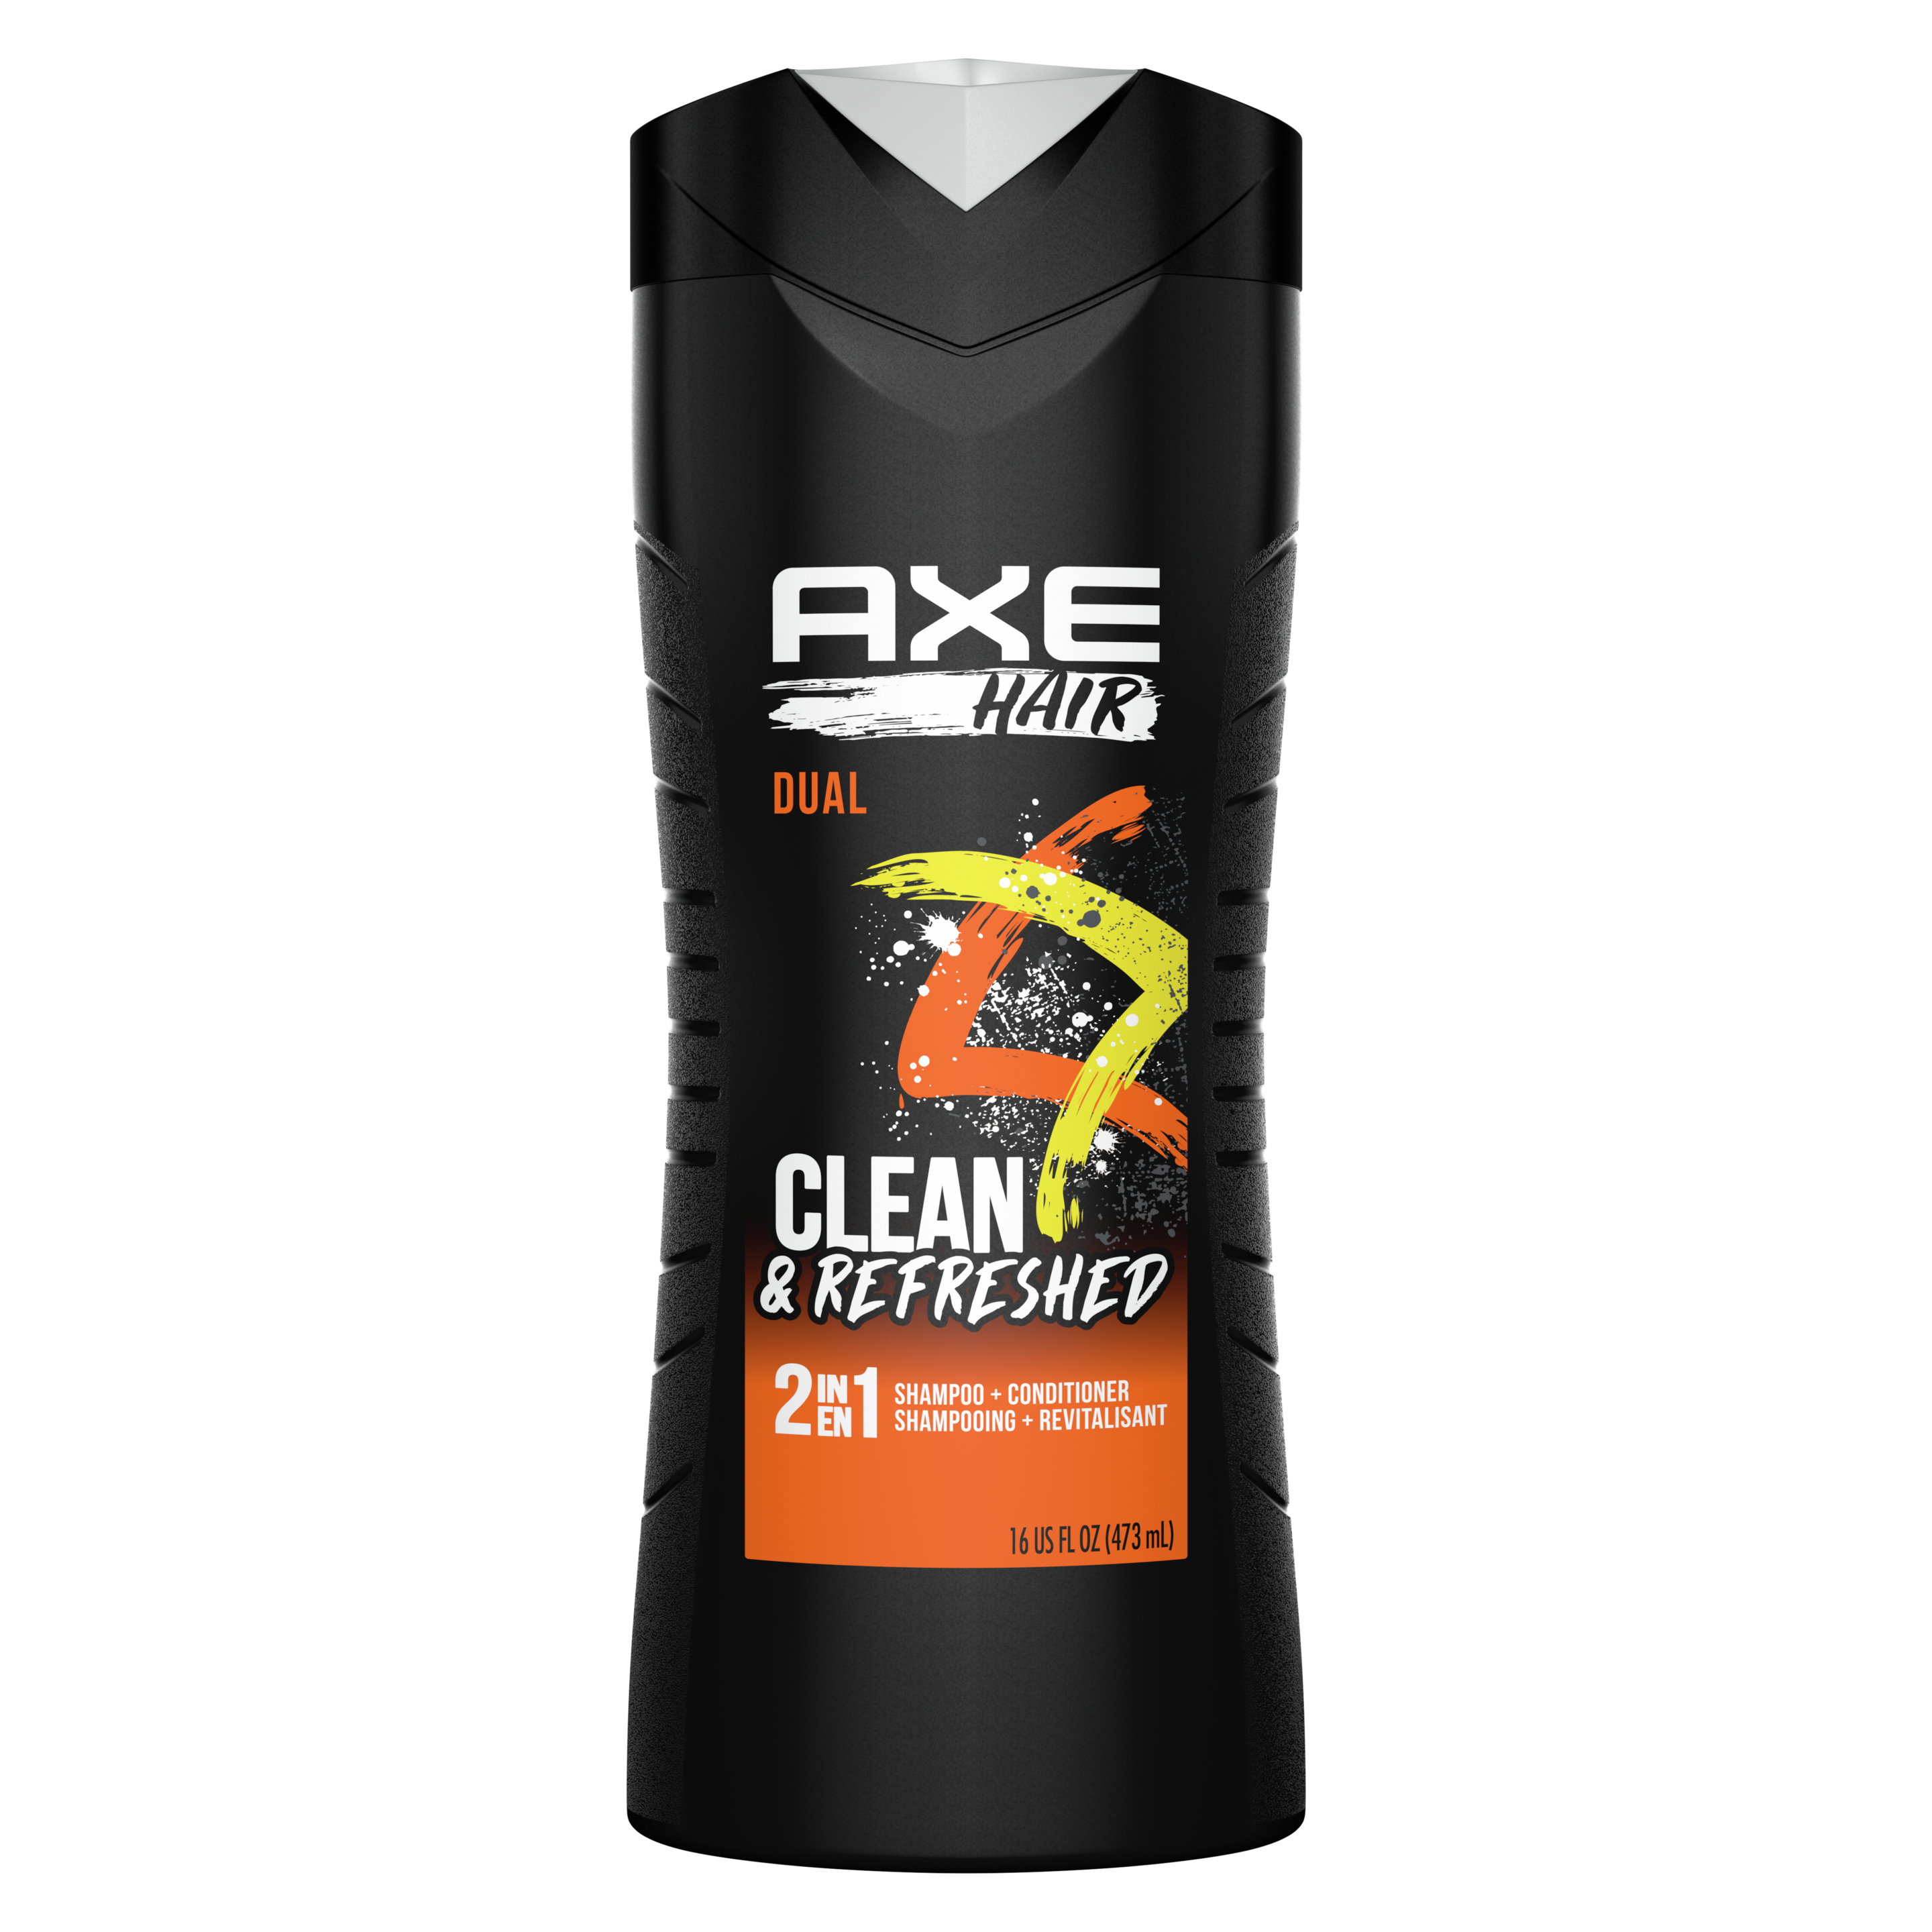 AXE Hair Dual 2-in-1 Shampoo and Conditioner